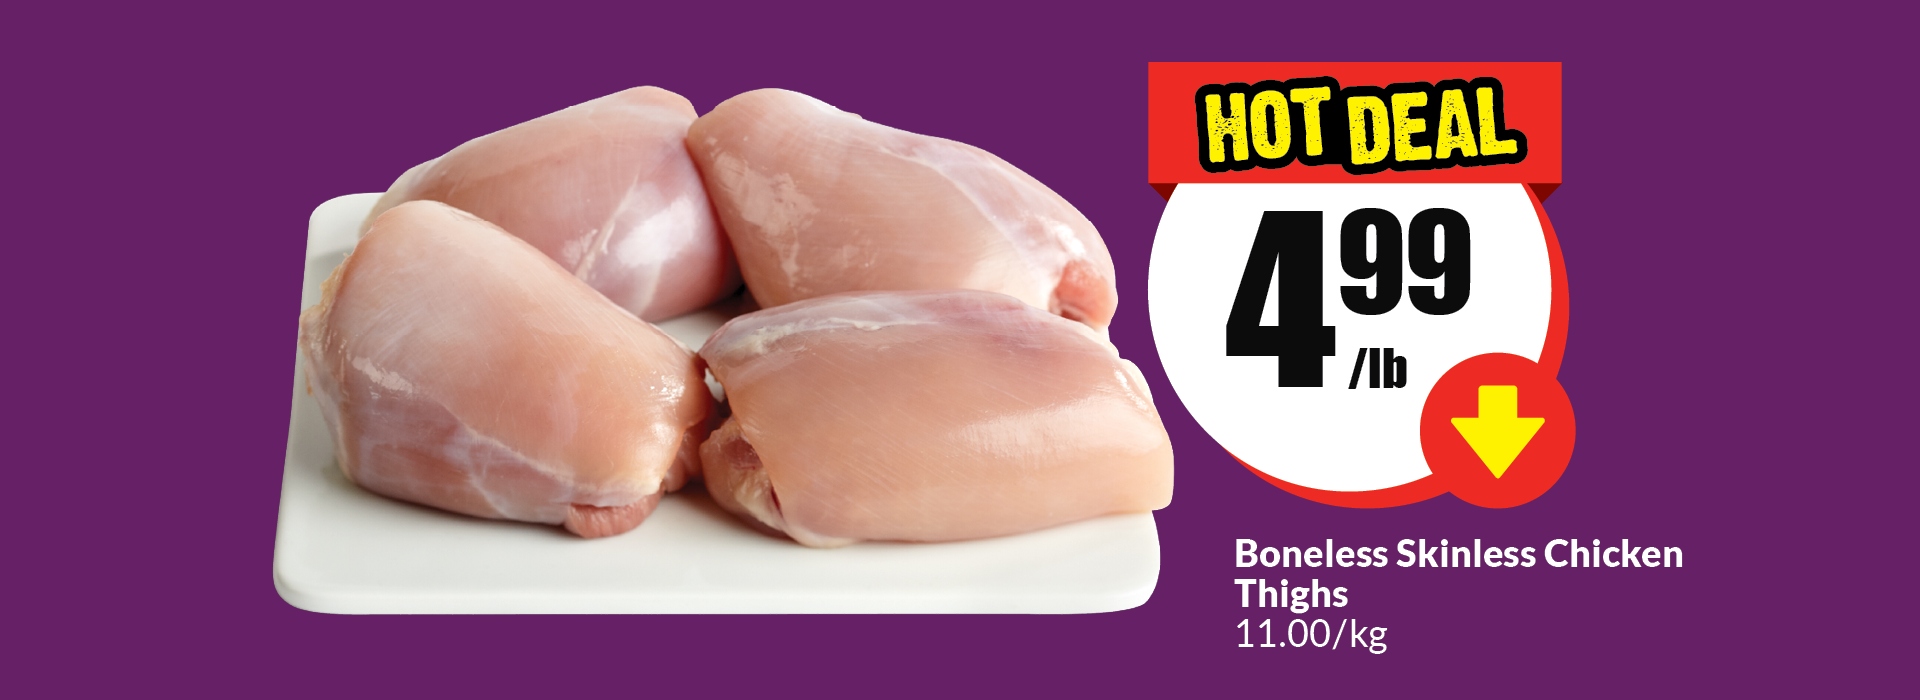 The following image contains the text,"Boneless skinless chicken thighs 11.00/kg. Get this hot deal at just $4.99/lb."